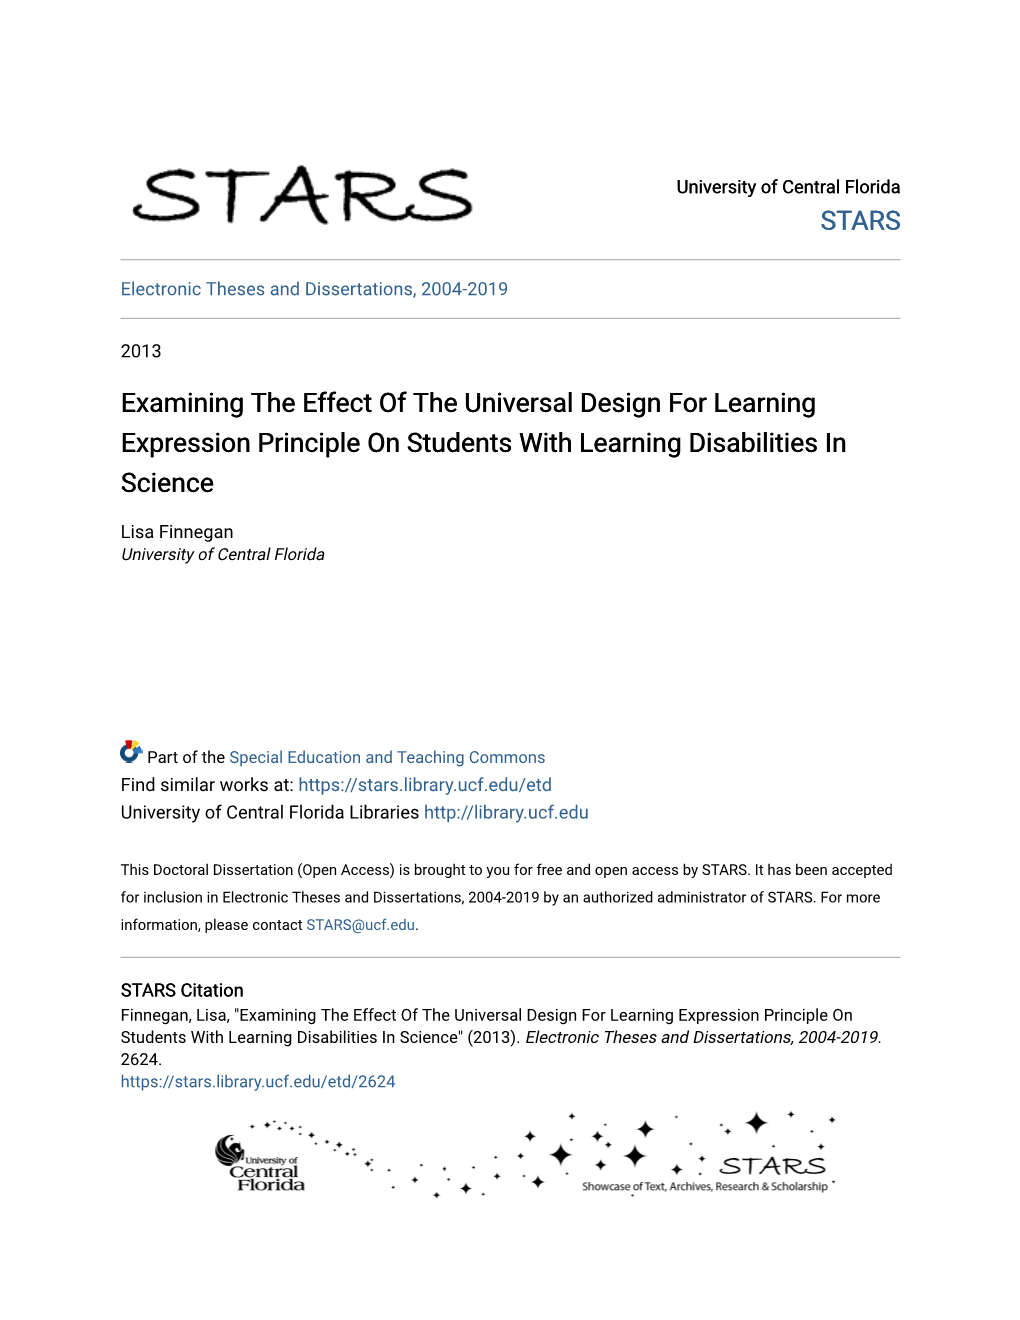 Examining the Effect of the Universal Design for Learning Expression Principle on Students with Learning Disabilities in Science